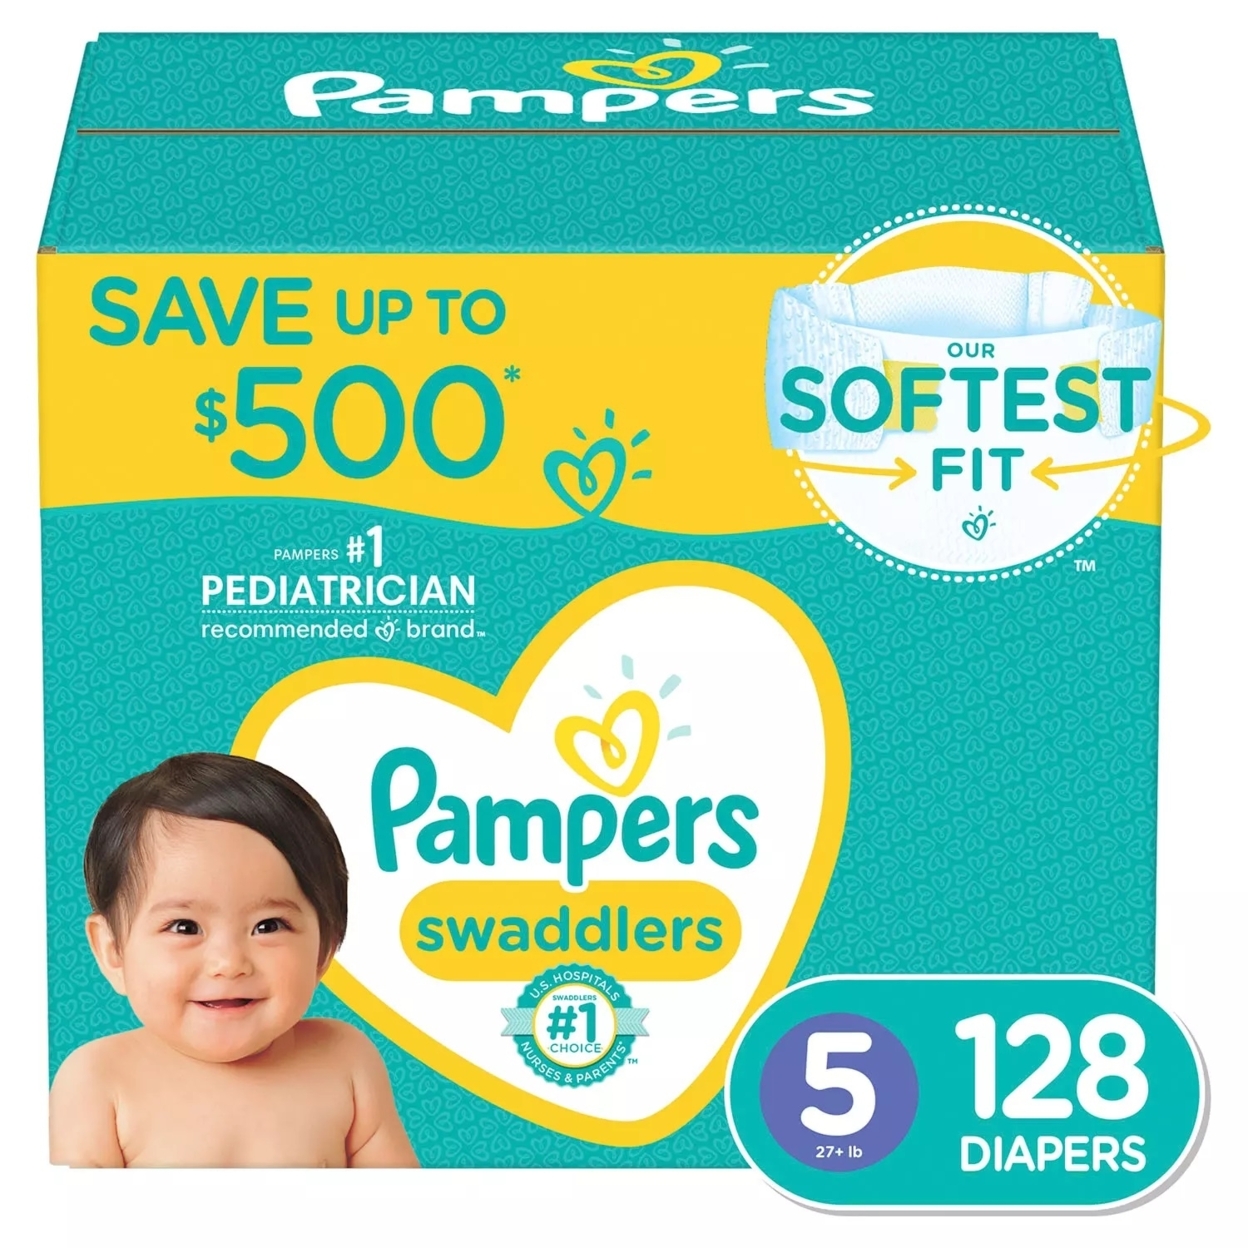 Pampers Swaddlers Diapers, Size 5 (27+ Pounds), 128 Count